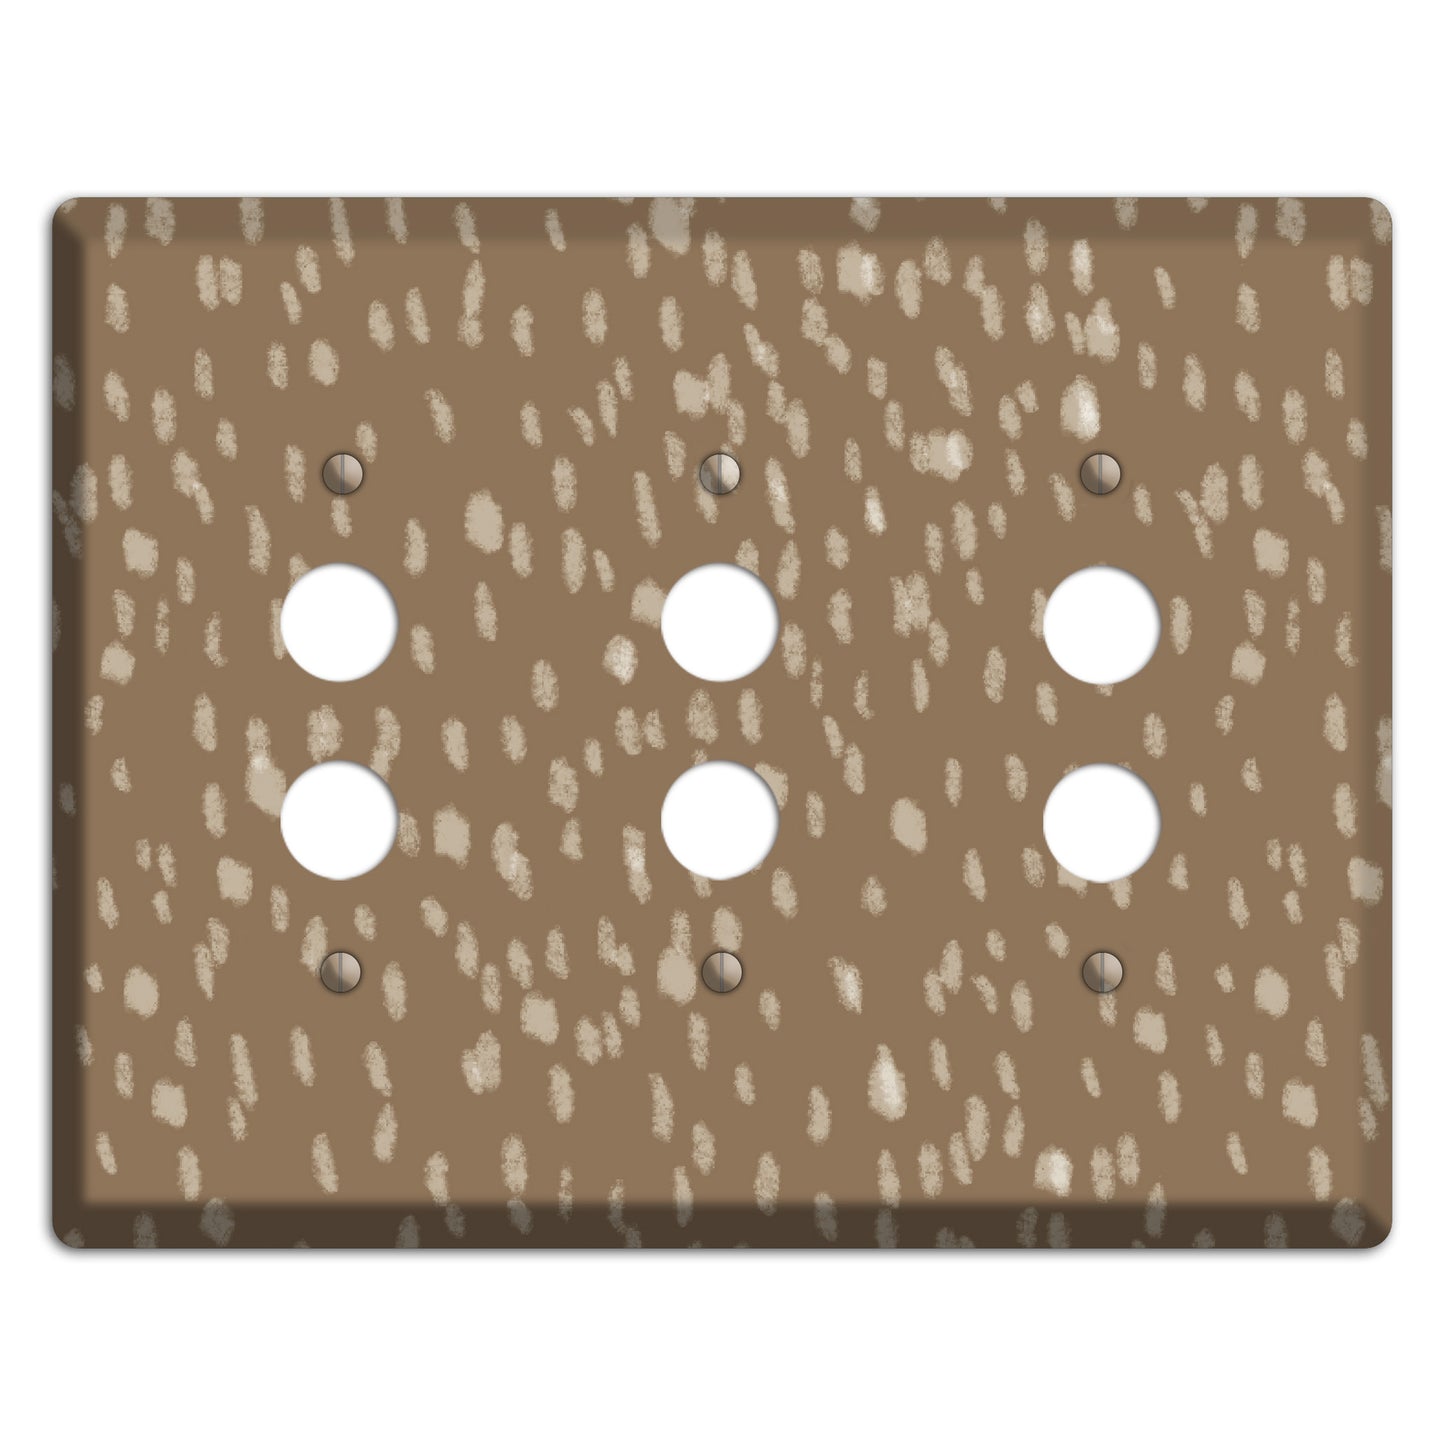 Brown and White Speckle 3 Pushbutton Wallplate